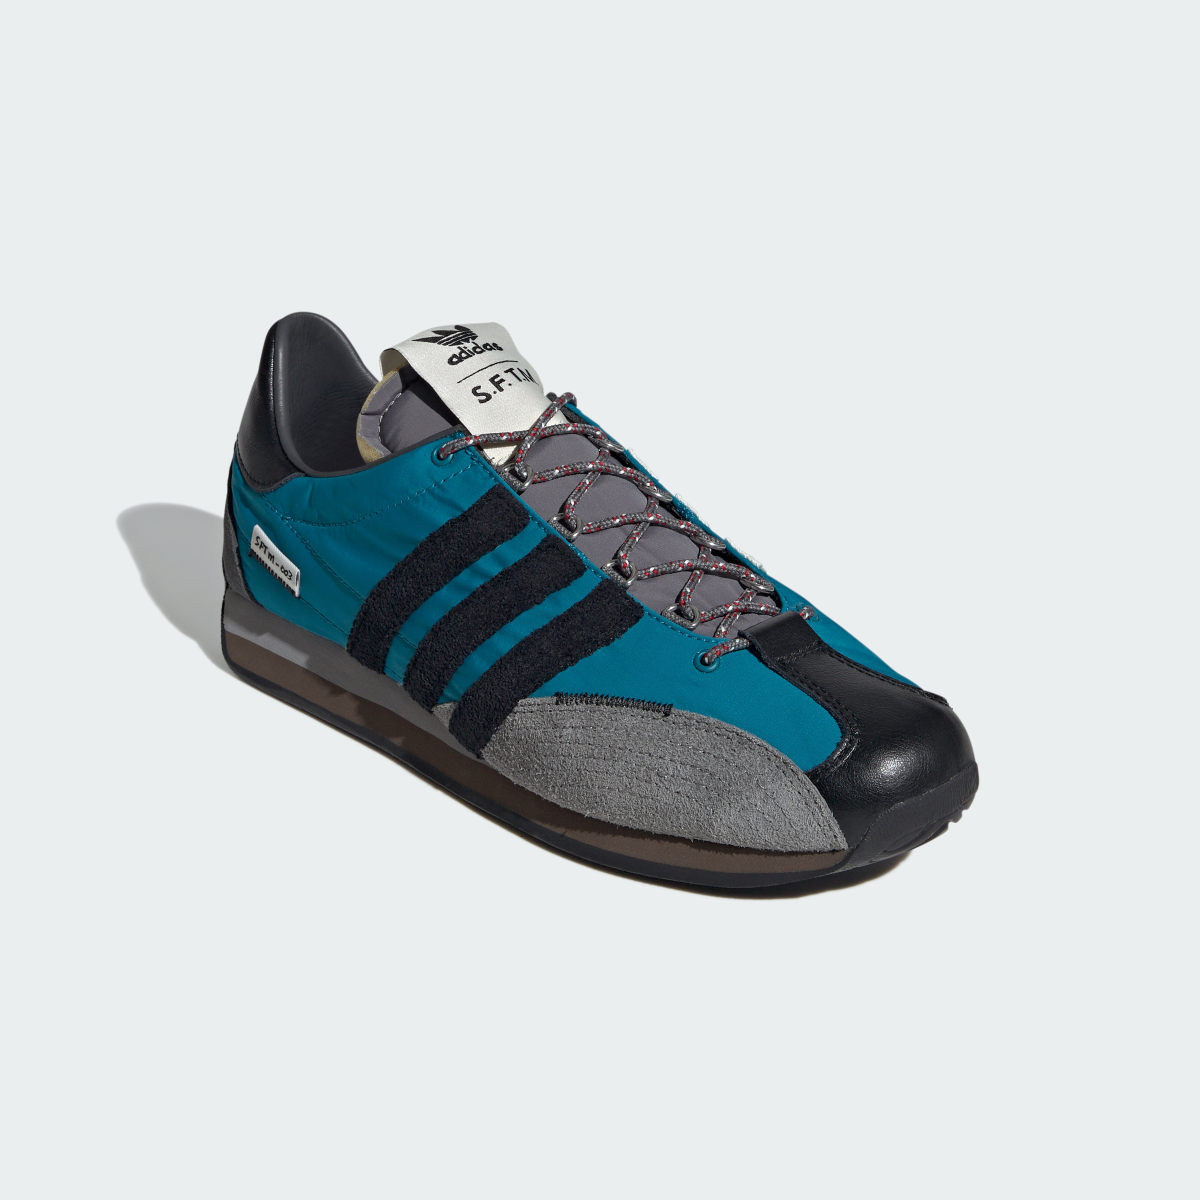 Adidas SFTM Country OG Low Trainers. 6